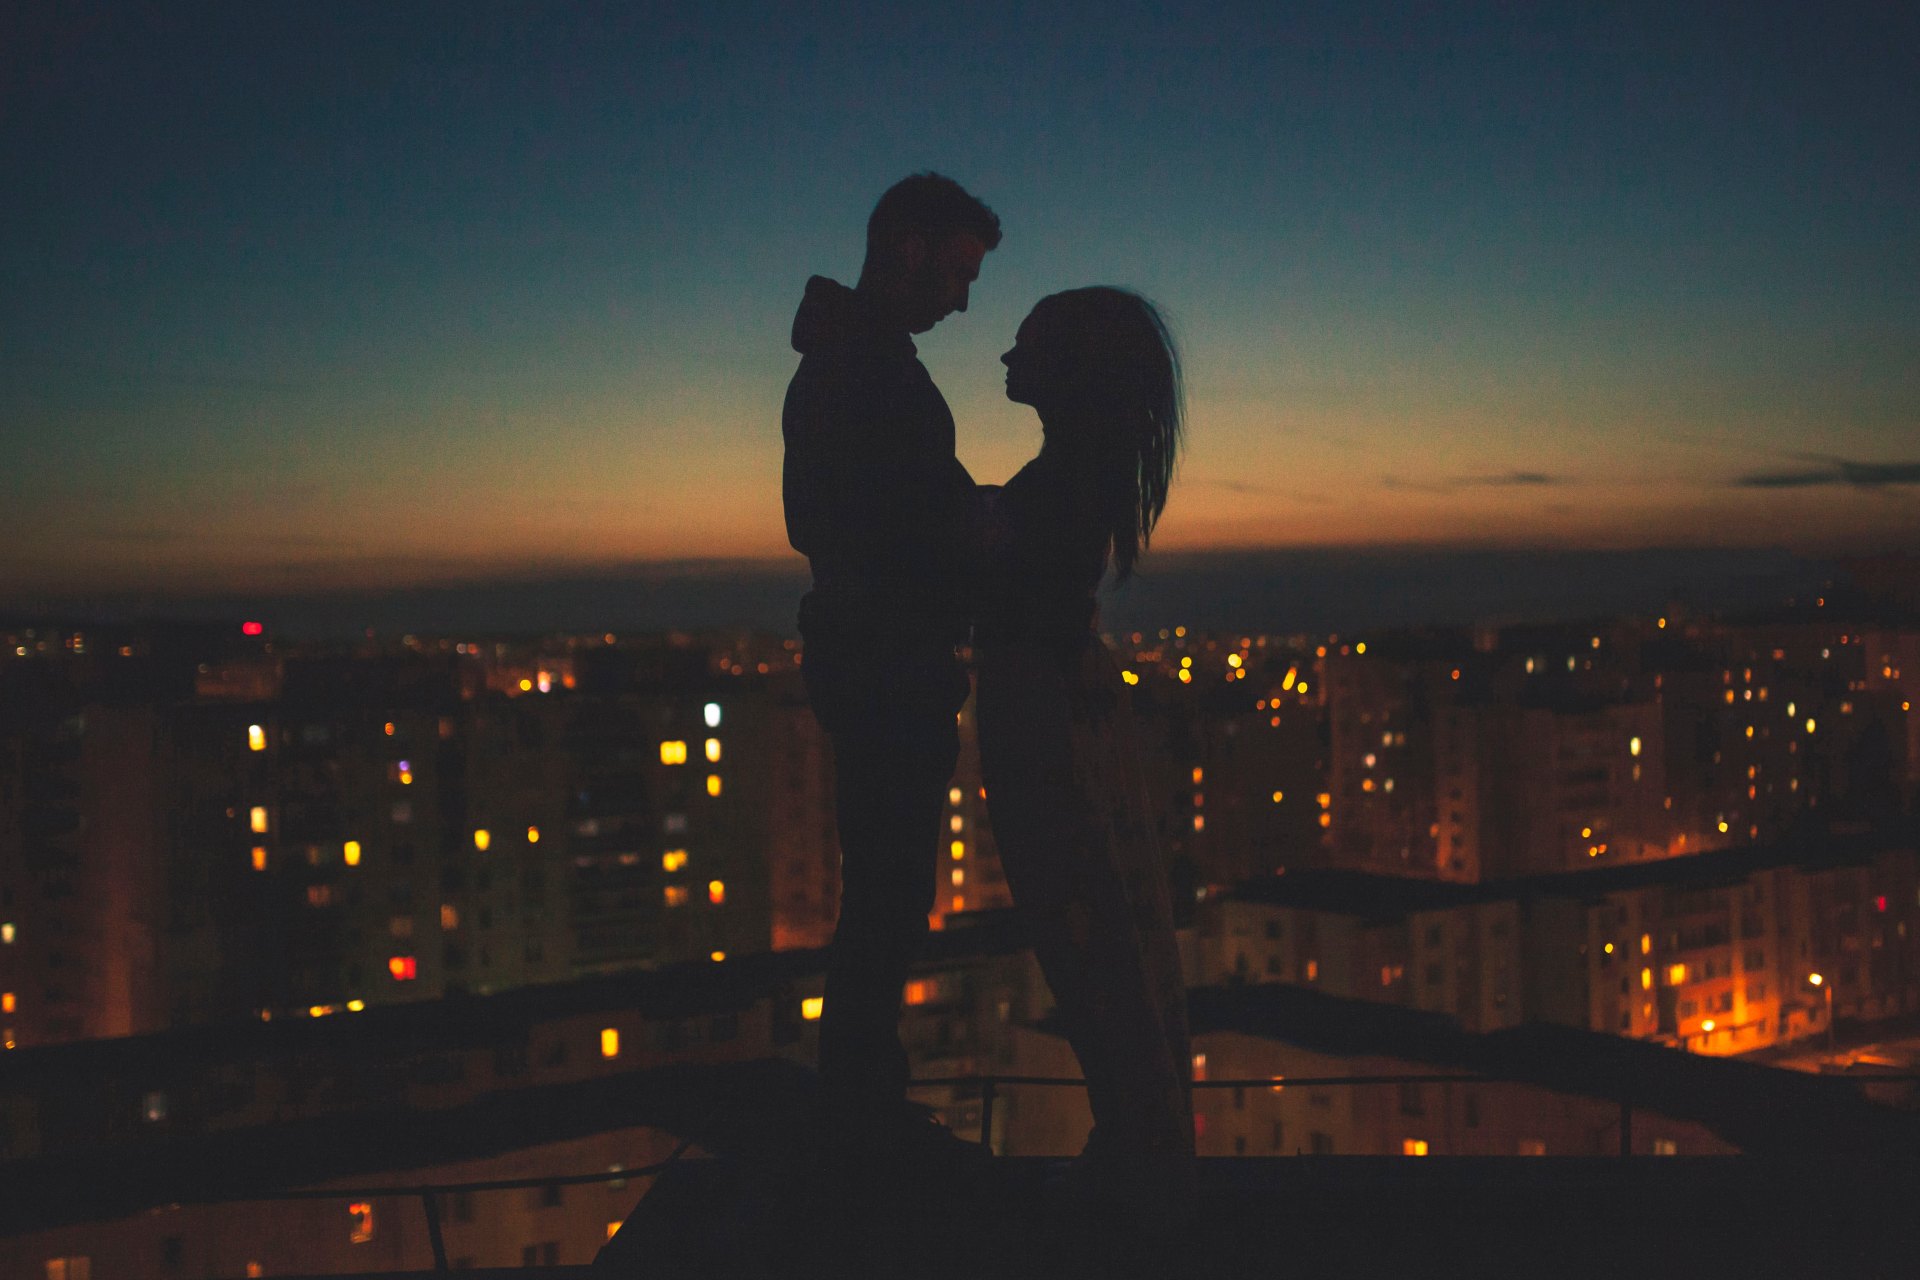 a man and woman embrace in the sunset over the city